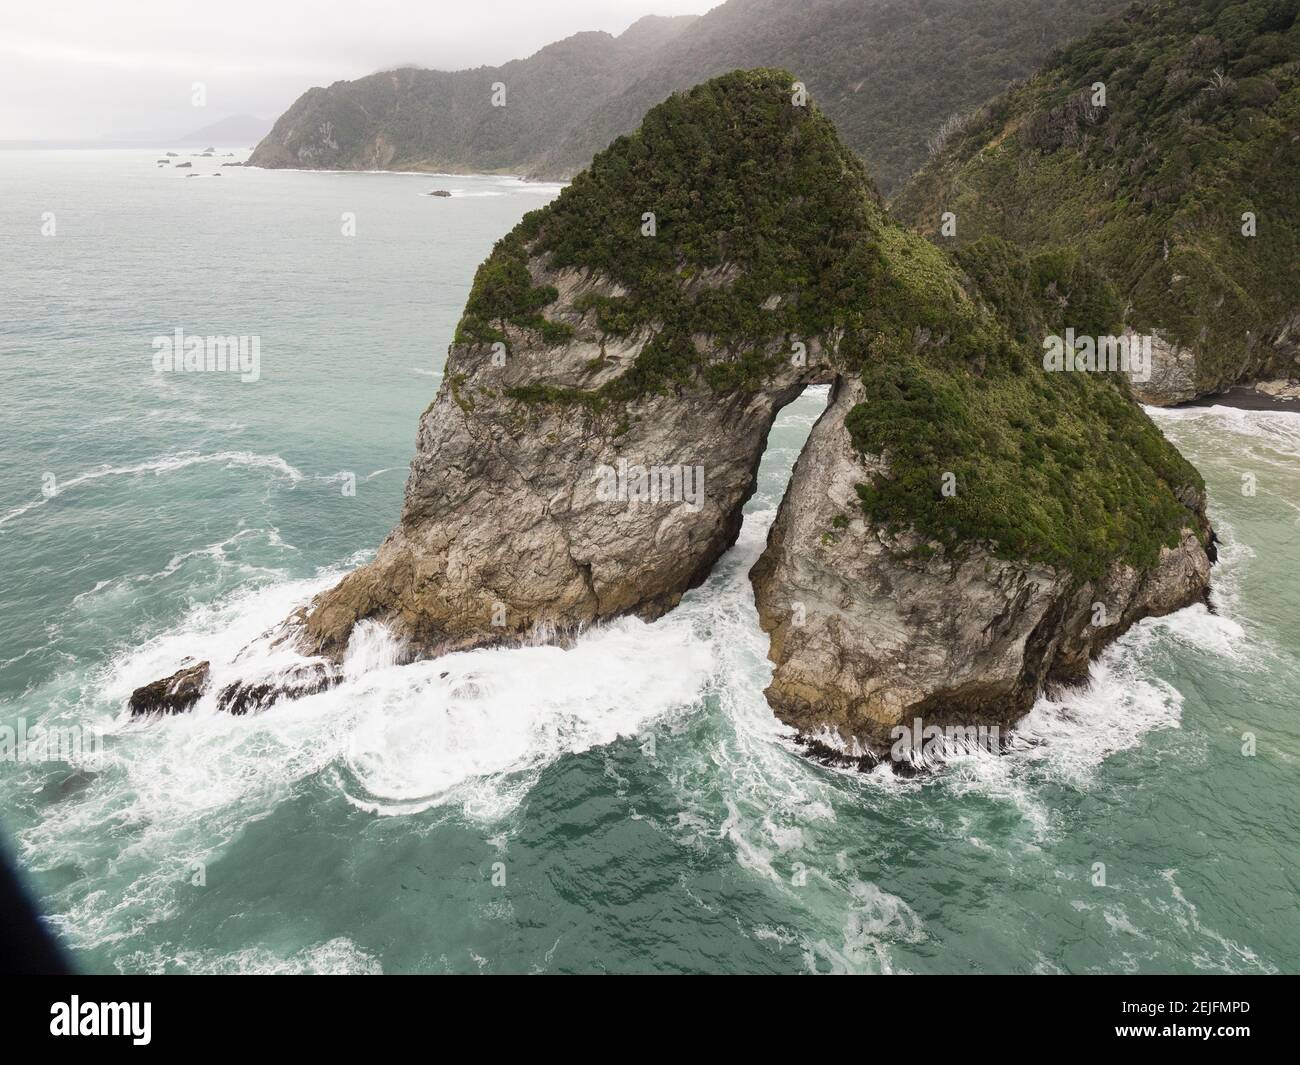 Rock formations in the sea, Milford Sound, South Island, New Zealand Stock Photo